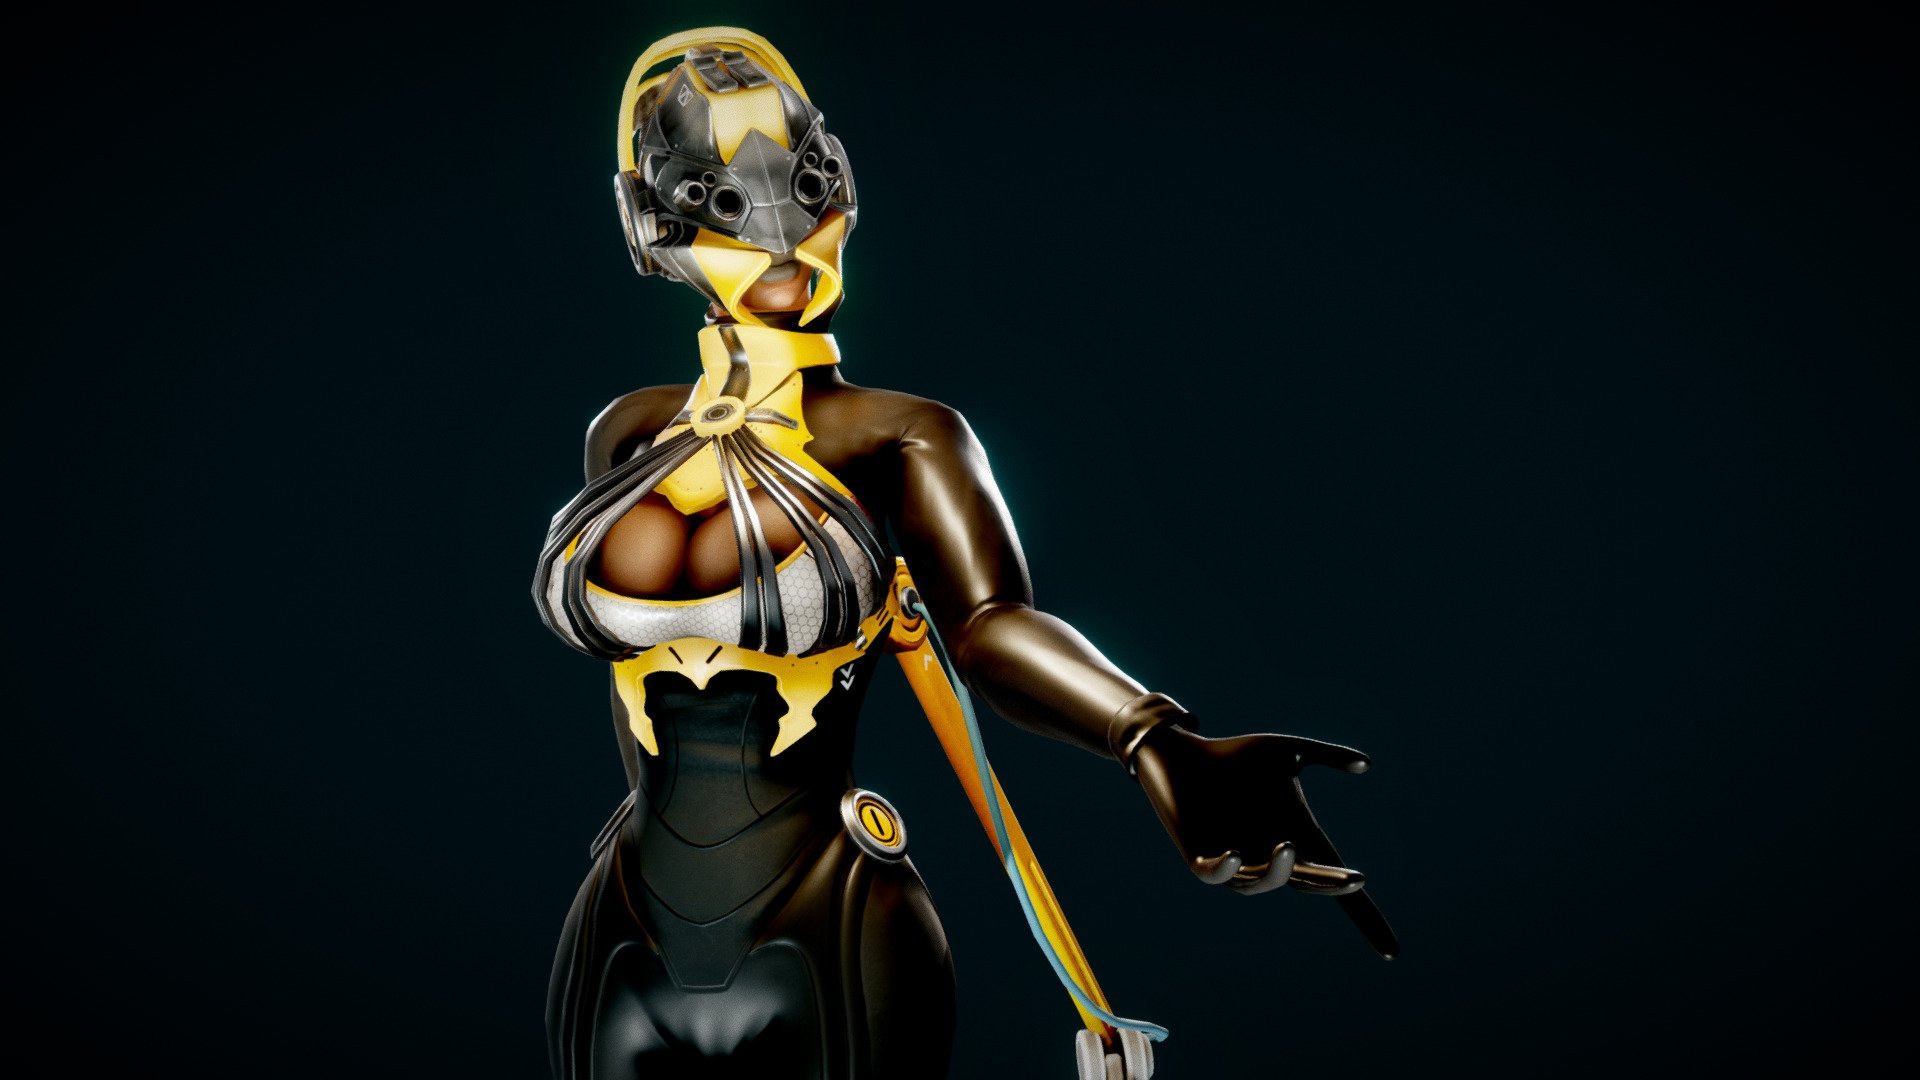 Renders: https://www.artstation.com/artwork/28JbwJ

A sci-fi girl with blades.
Suitable for PC projects (FPS, TPS, RPGs, etc)
Rigged, supports mecanim and third-party animations.
Supports HDRP 3d model